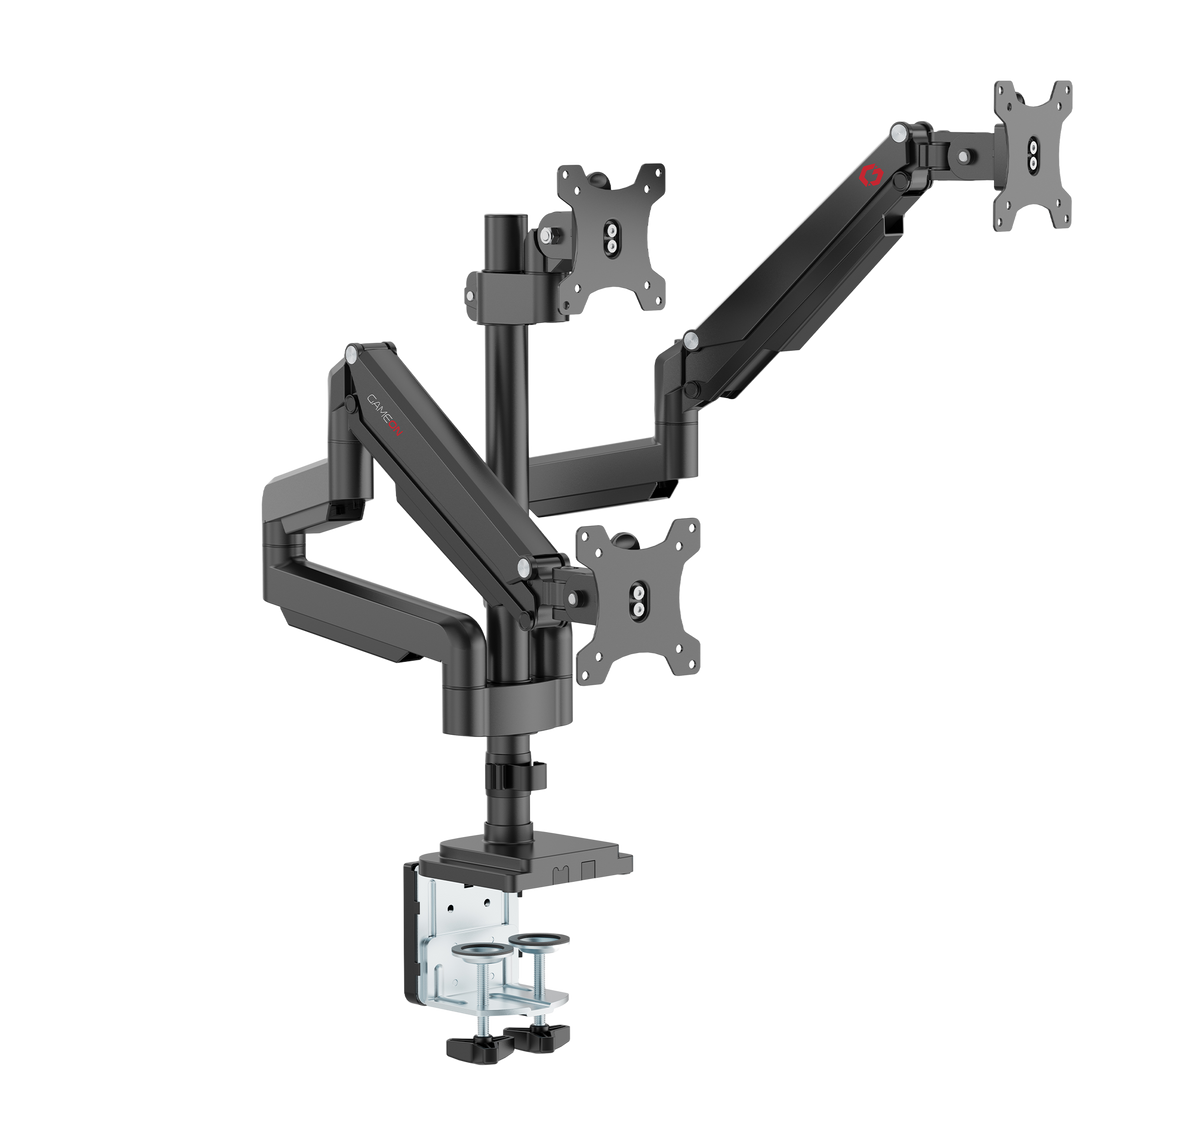 GAMEON GO-5367 Triple Monitor Arm, Stand And Mount For Gaming And Office Use, 17" - 30", Each Arm Up To 6 KG